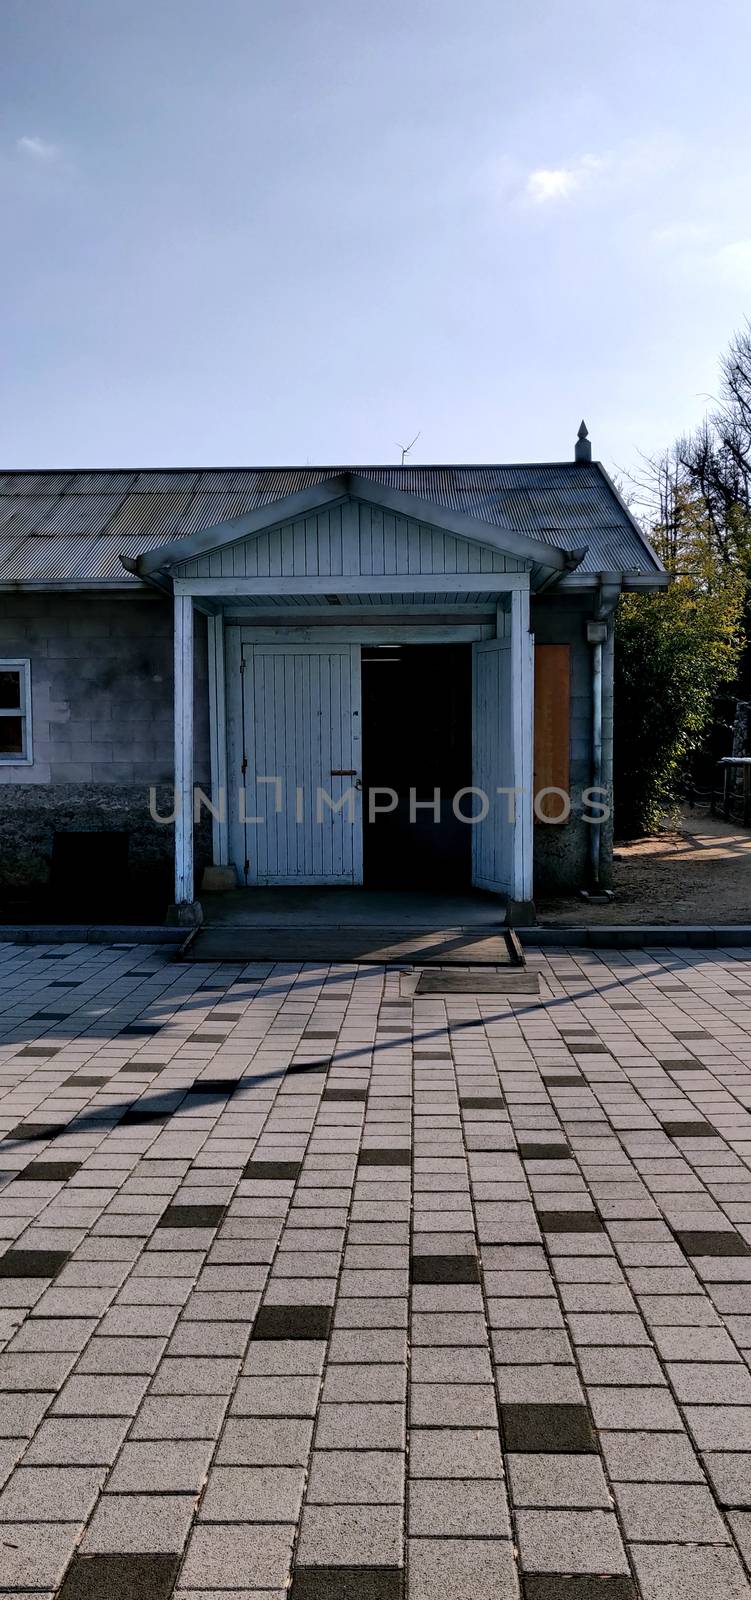 An abandoned old house with white wooden door and brick pavement with tin roof somewhere in Korea